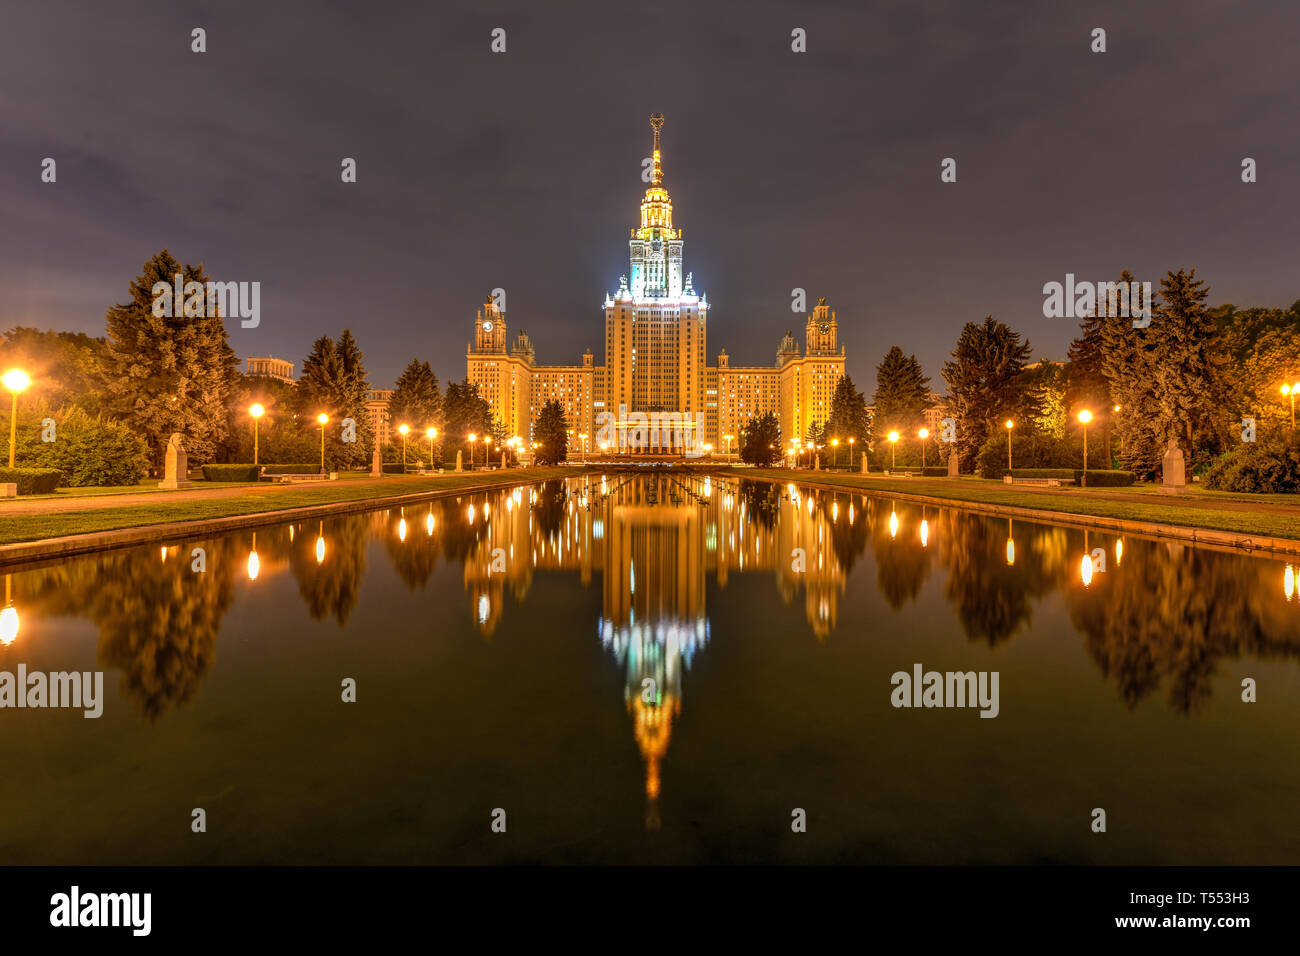 Night view of the Moscow State University in Russia. Moscow State University is a coeducational and public research university located in Moscow, Russ Stock Photo